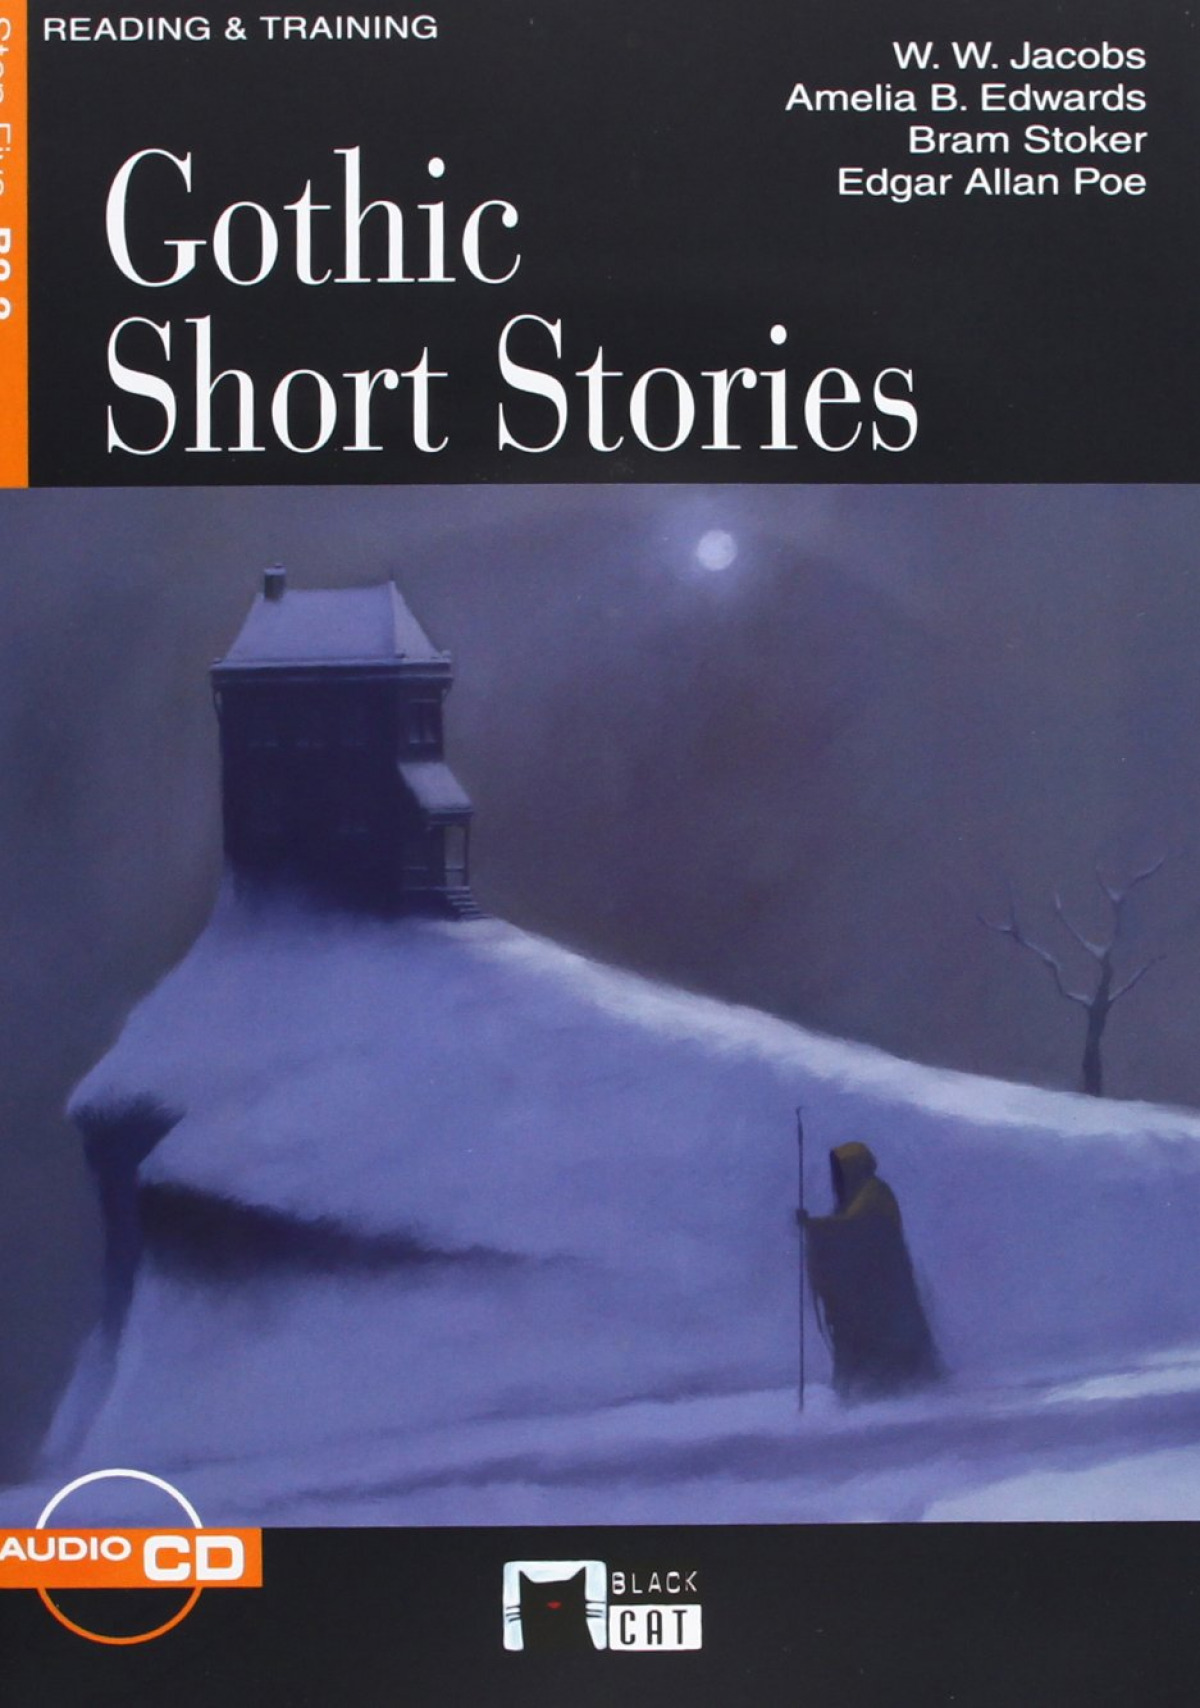 Gothic short stories, ESO. Material auxiliar